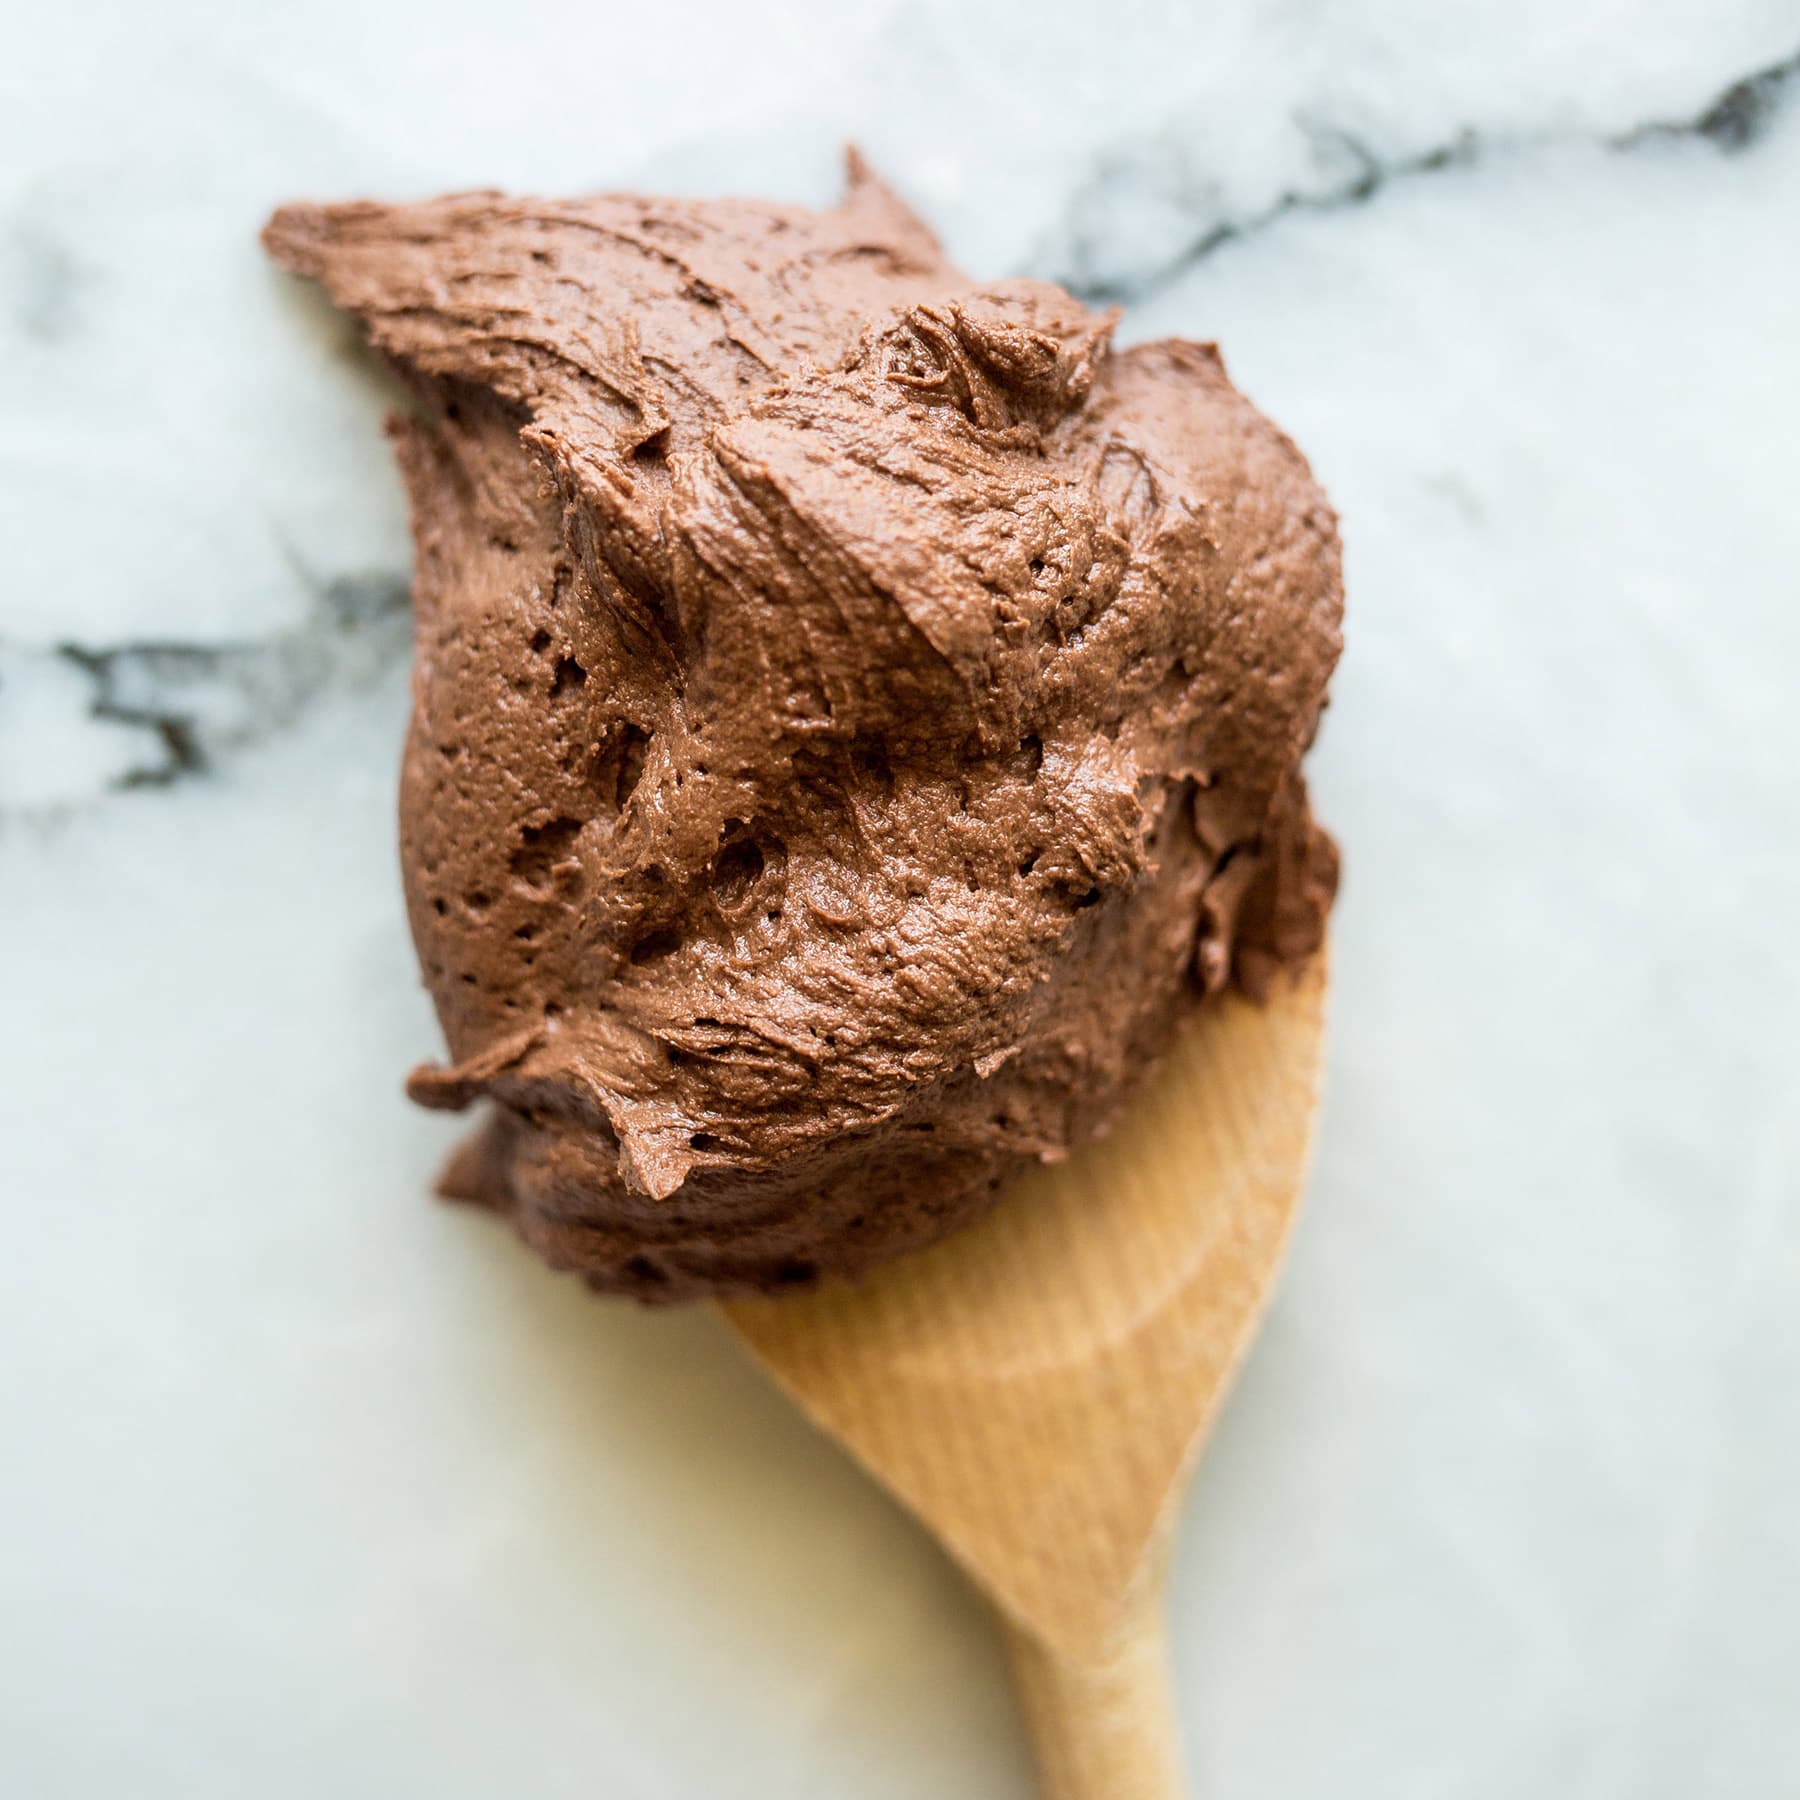 My Dark Chocolate Buttercream recipe is ultra rich, silky, and smooth with intense chocolate flavor and just the perfect amount of sweetness. Amazing on any cake or cupcake!